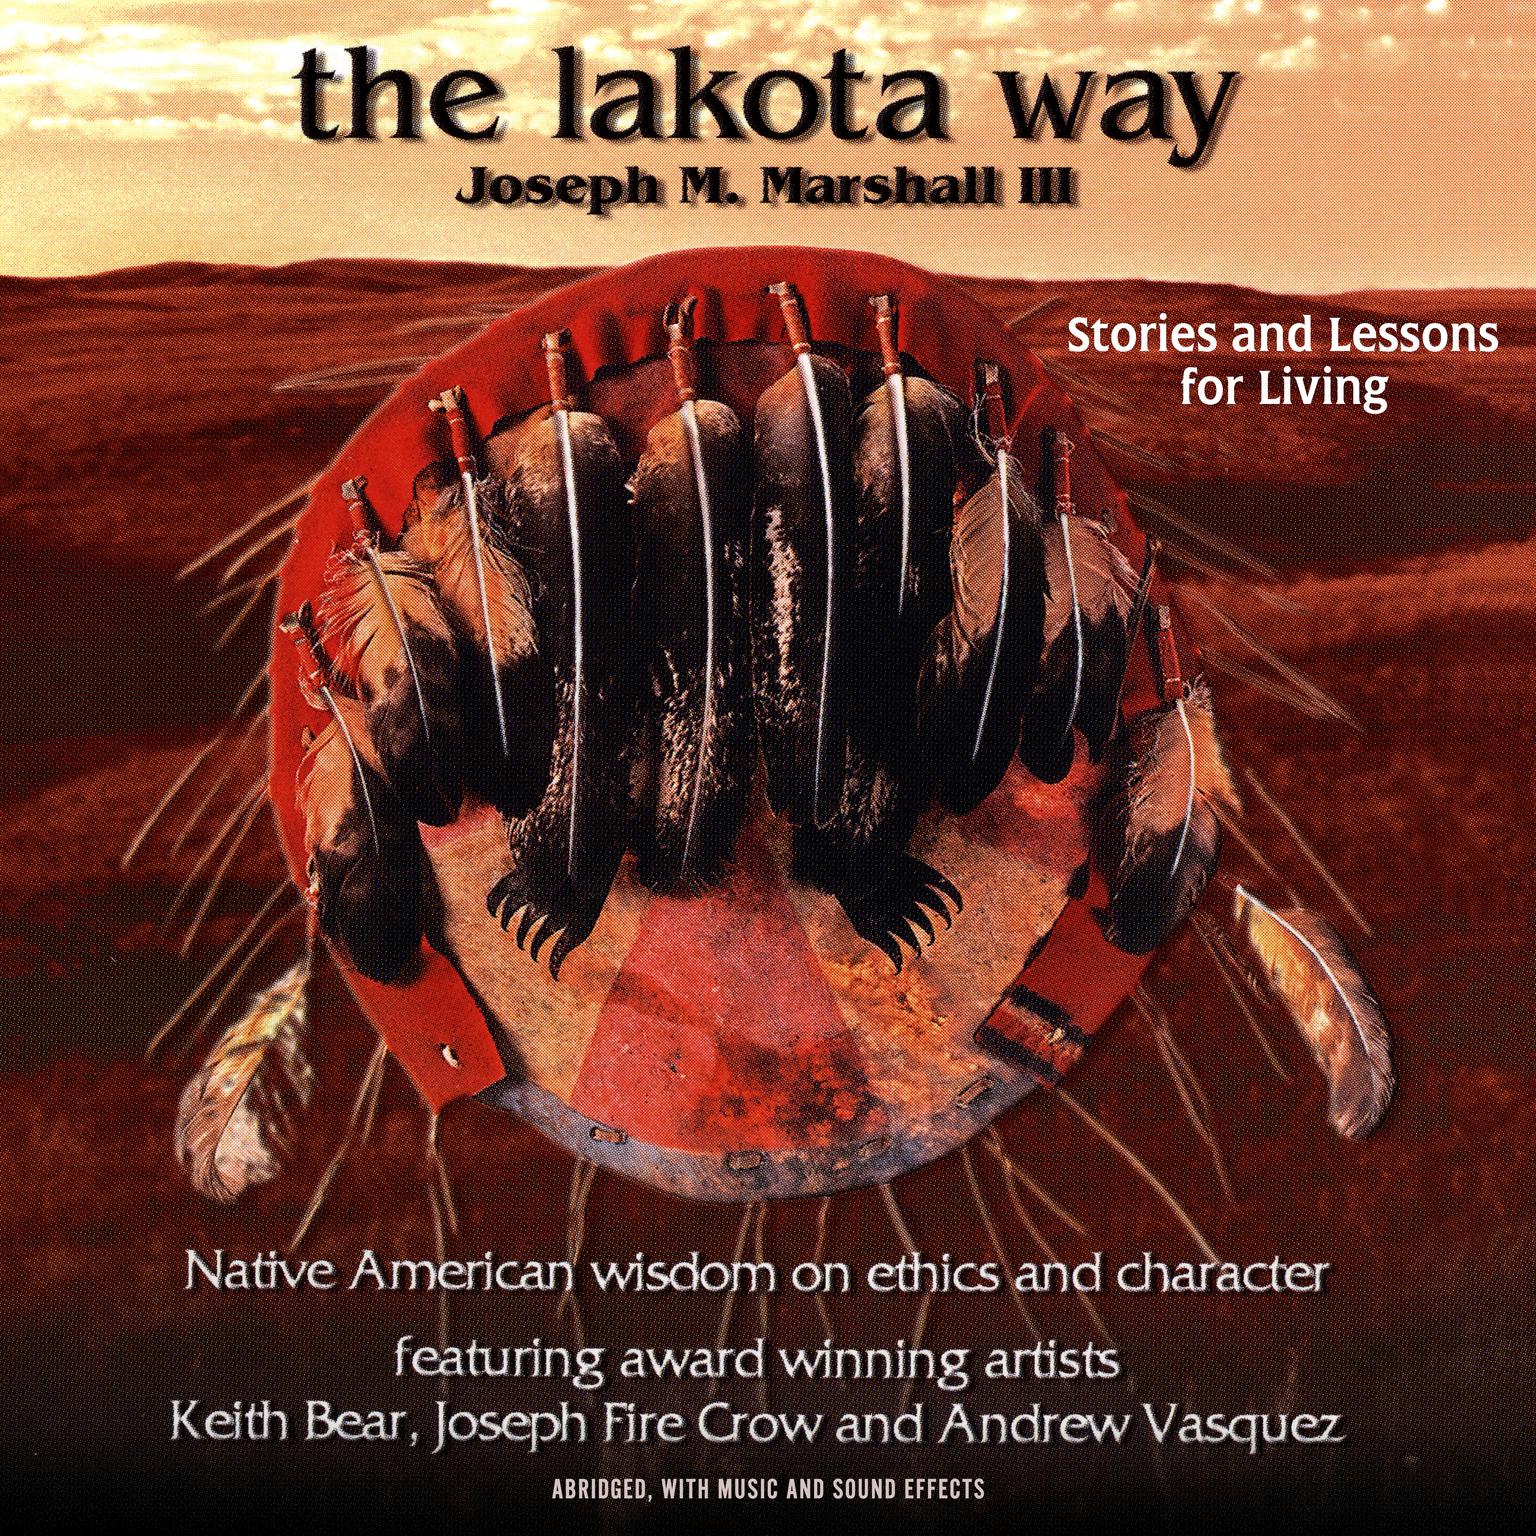 The Lakota Way (Abridged): Stories and Lessons for Living (abridged, with music and sound effects) Audiobook, by Joseph M. Marshall